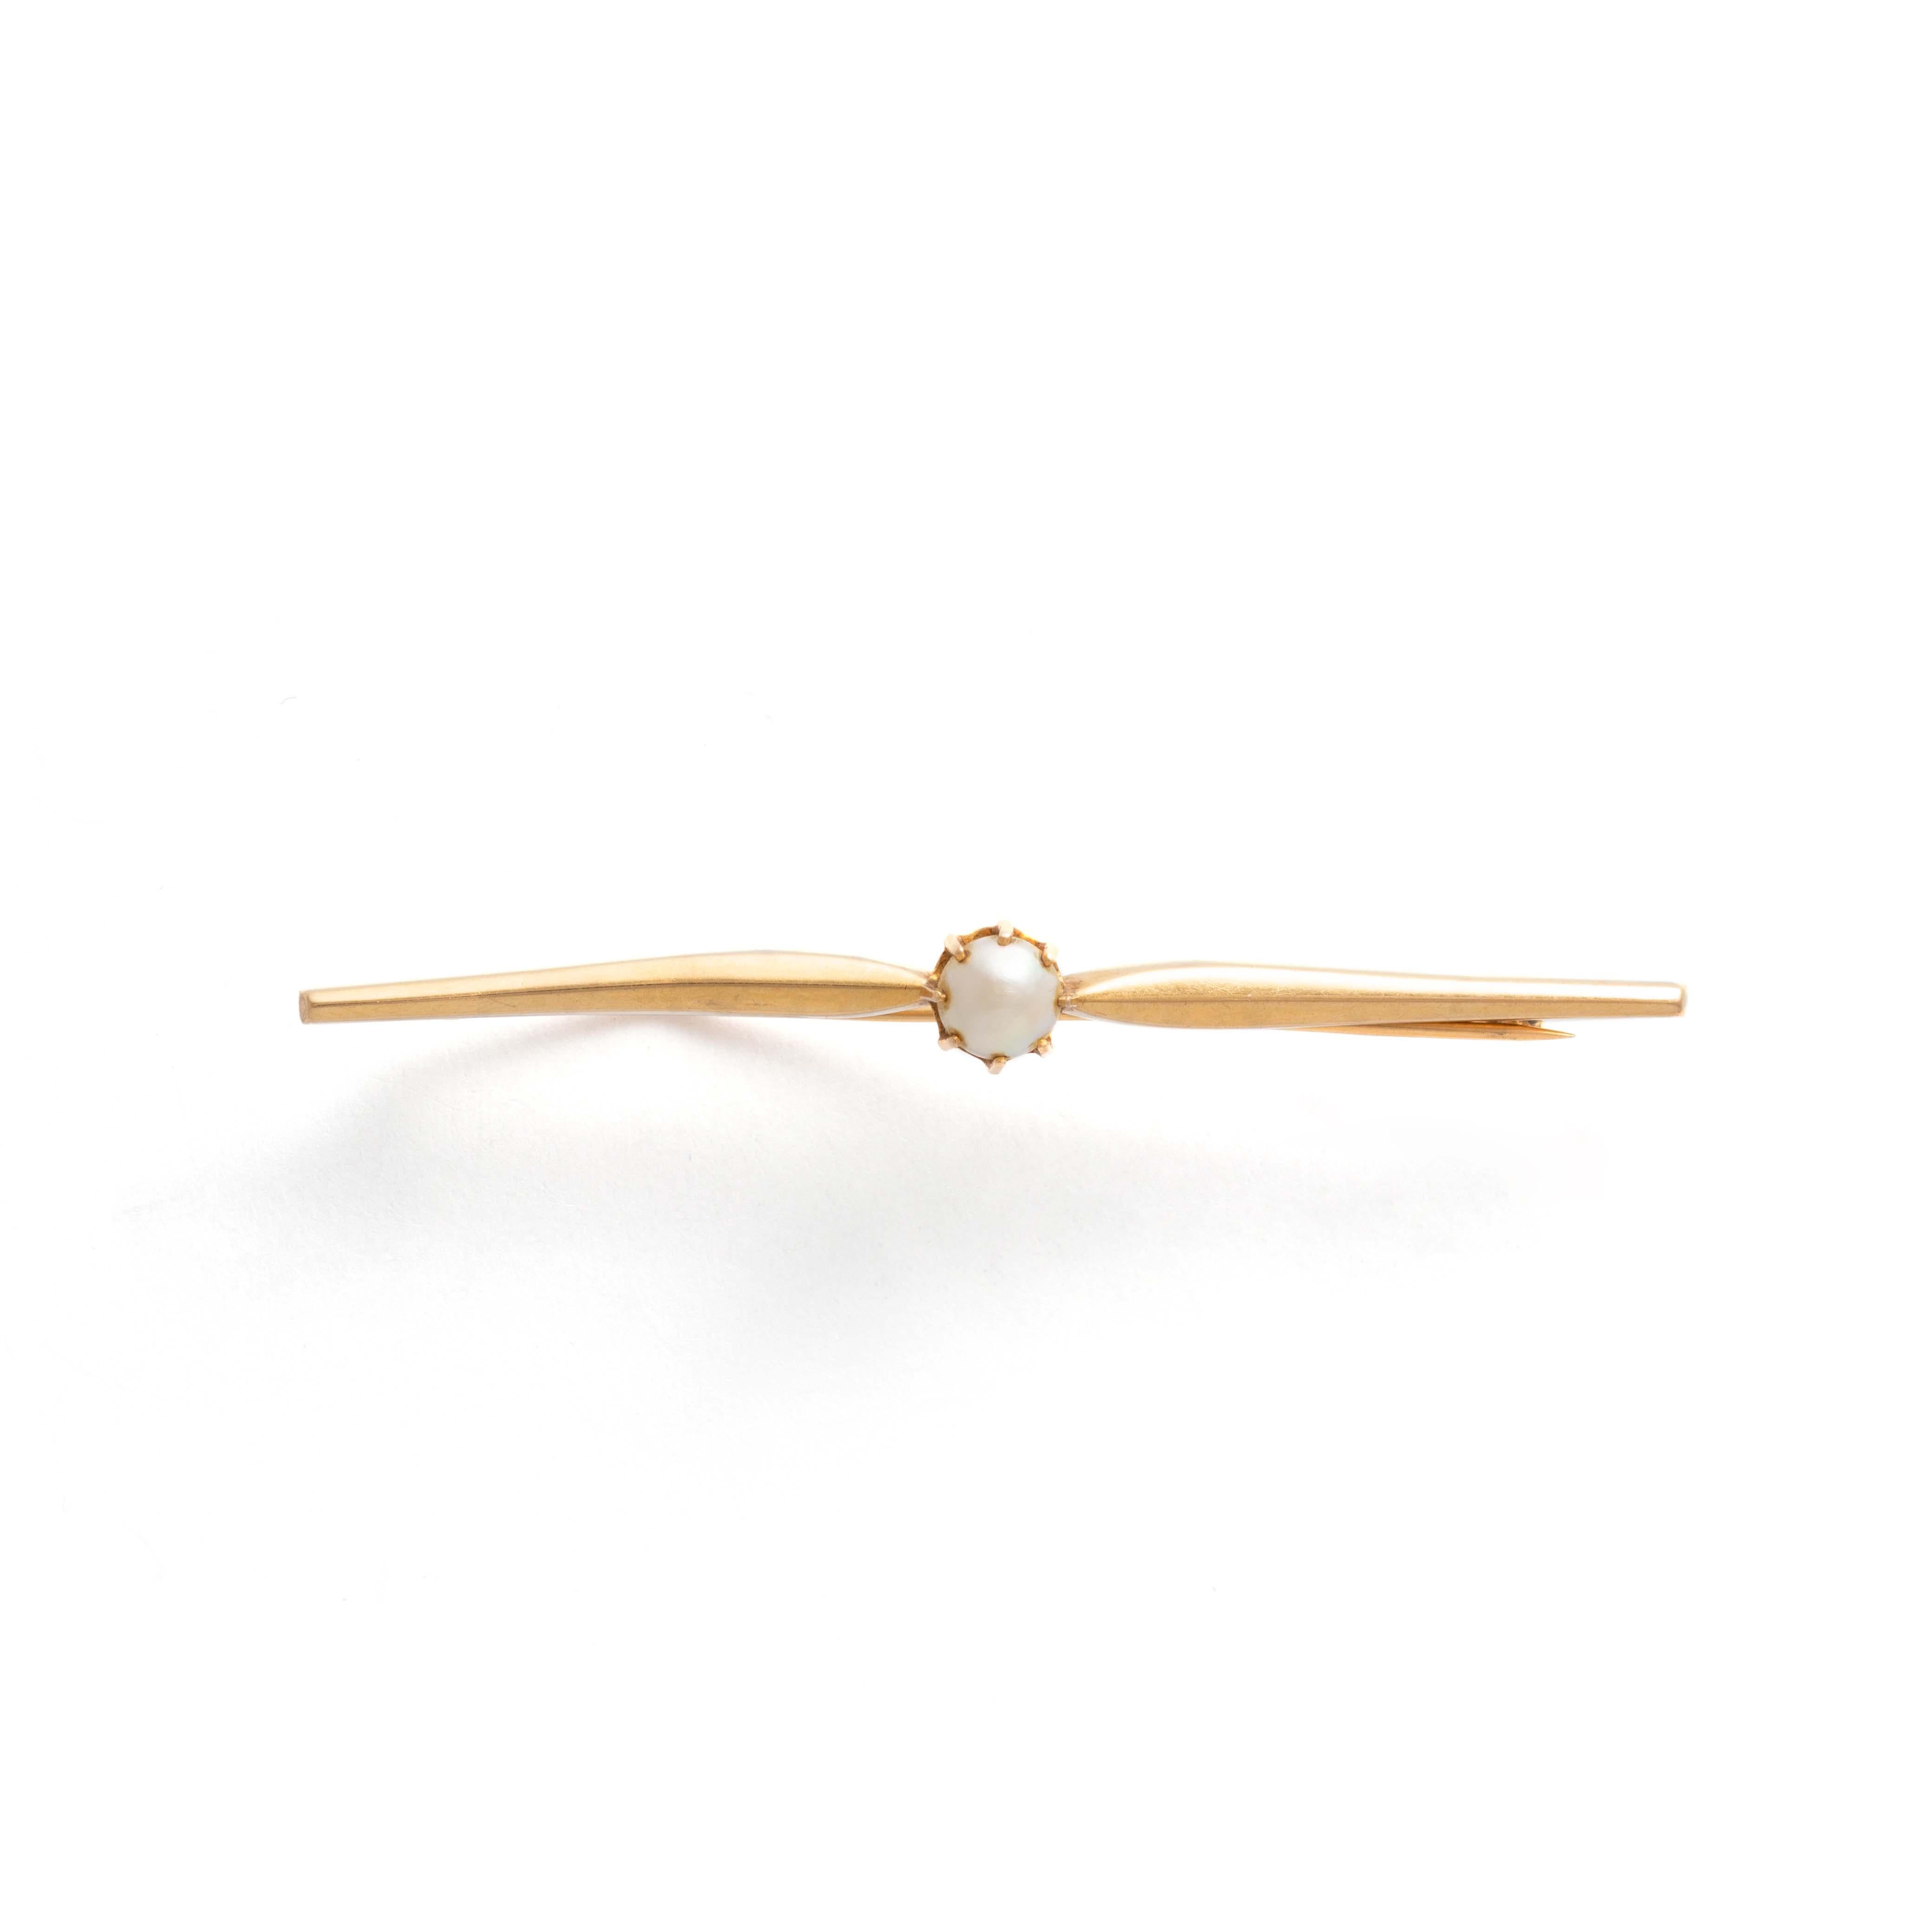 18K yellow gold brooch centered by a cultured pearl.
Length: 5.80 centimeters. 
Gross weight: 2.11 grams.